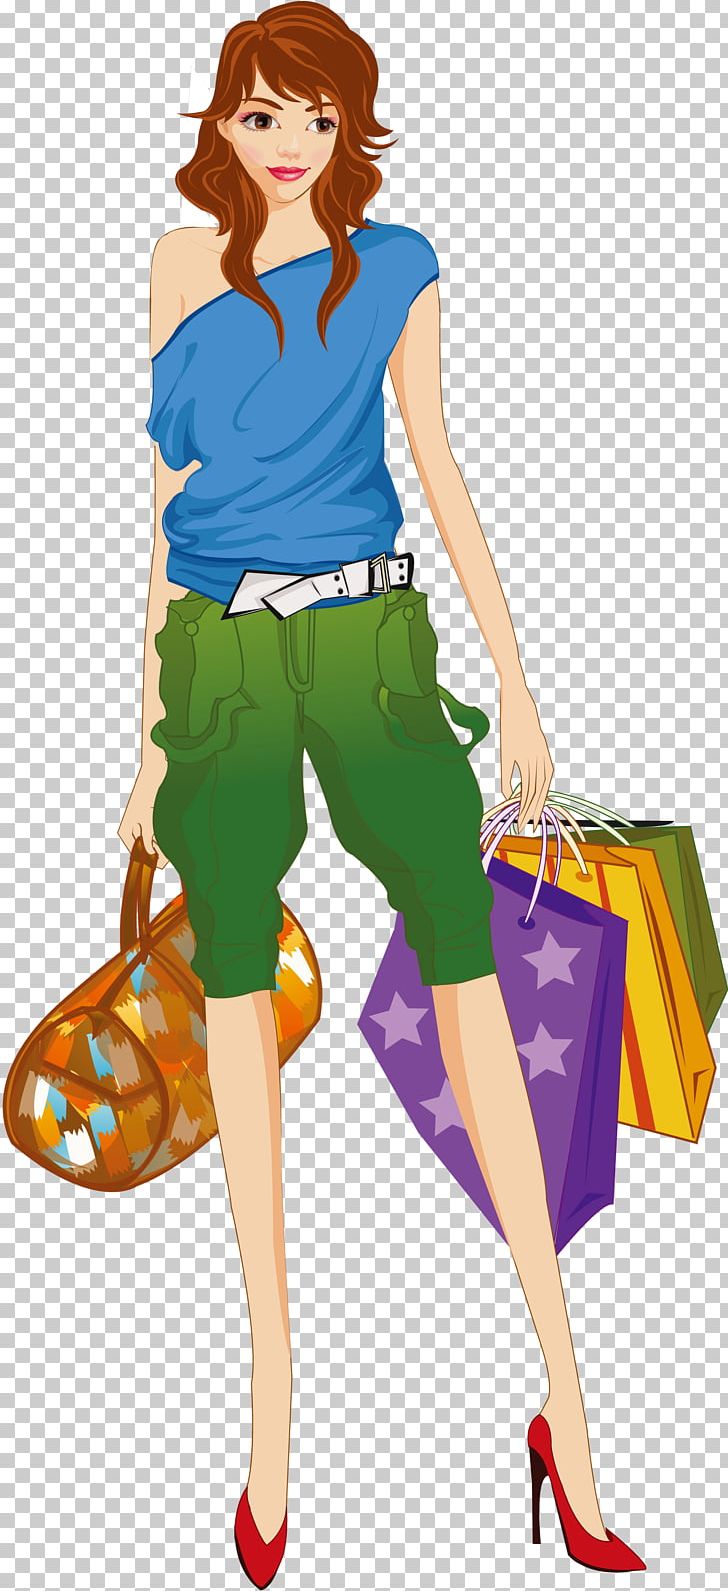 Shopping Woman PNG, Clipart, Art, Bag, Cartoon, Clothing, Costume Free PNG Download